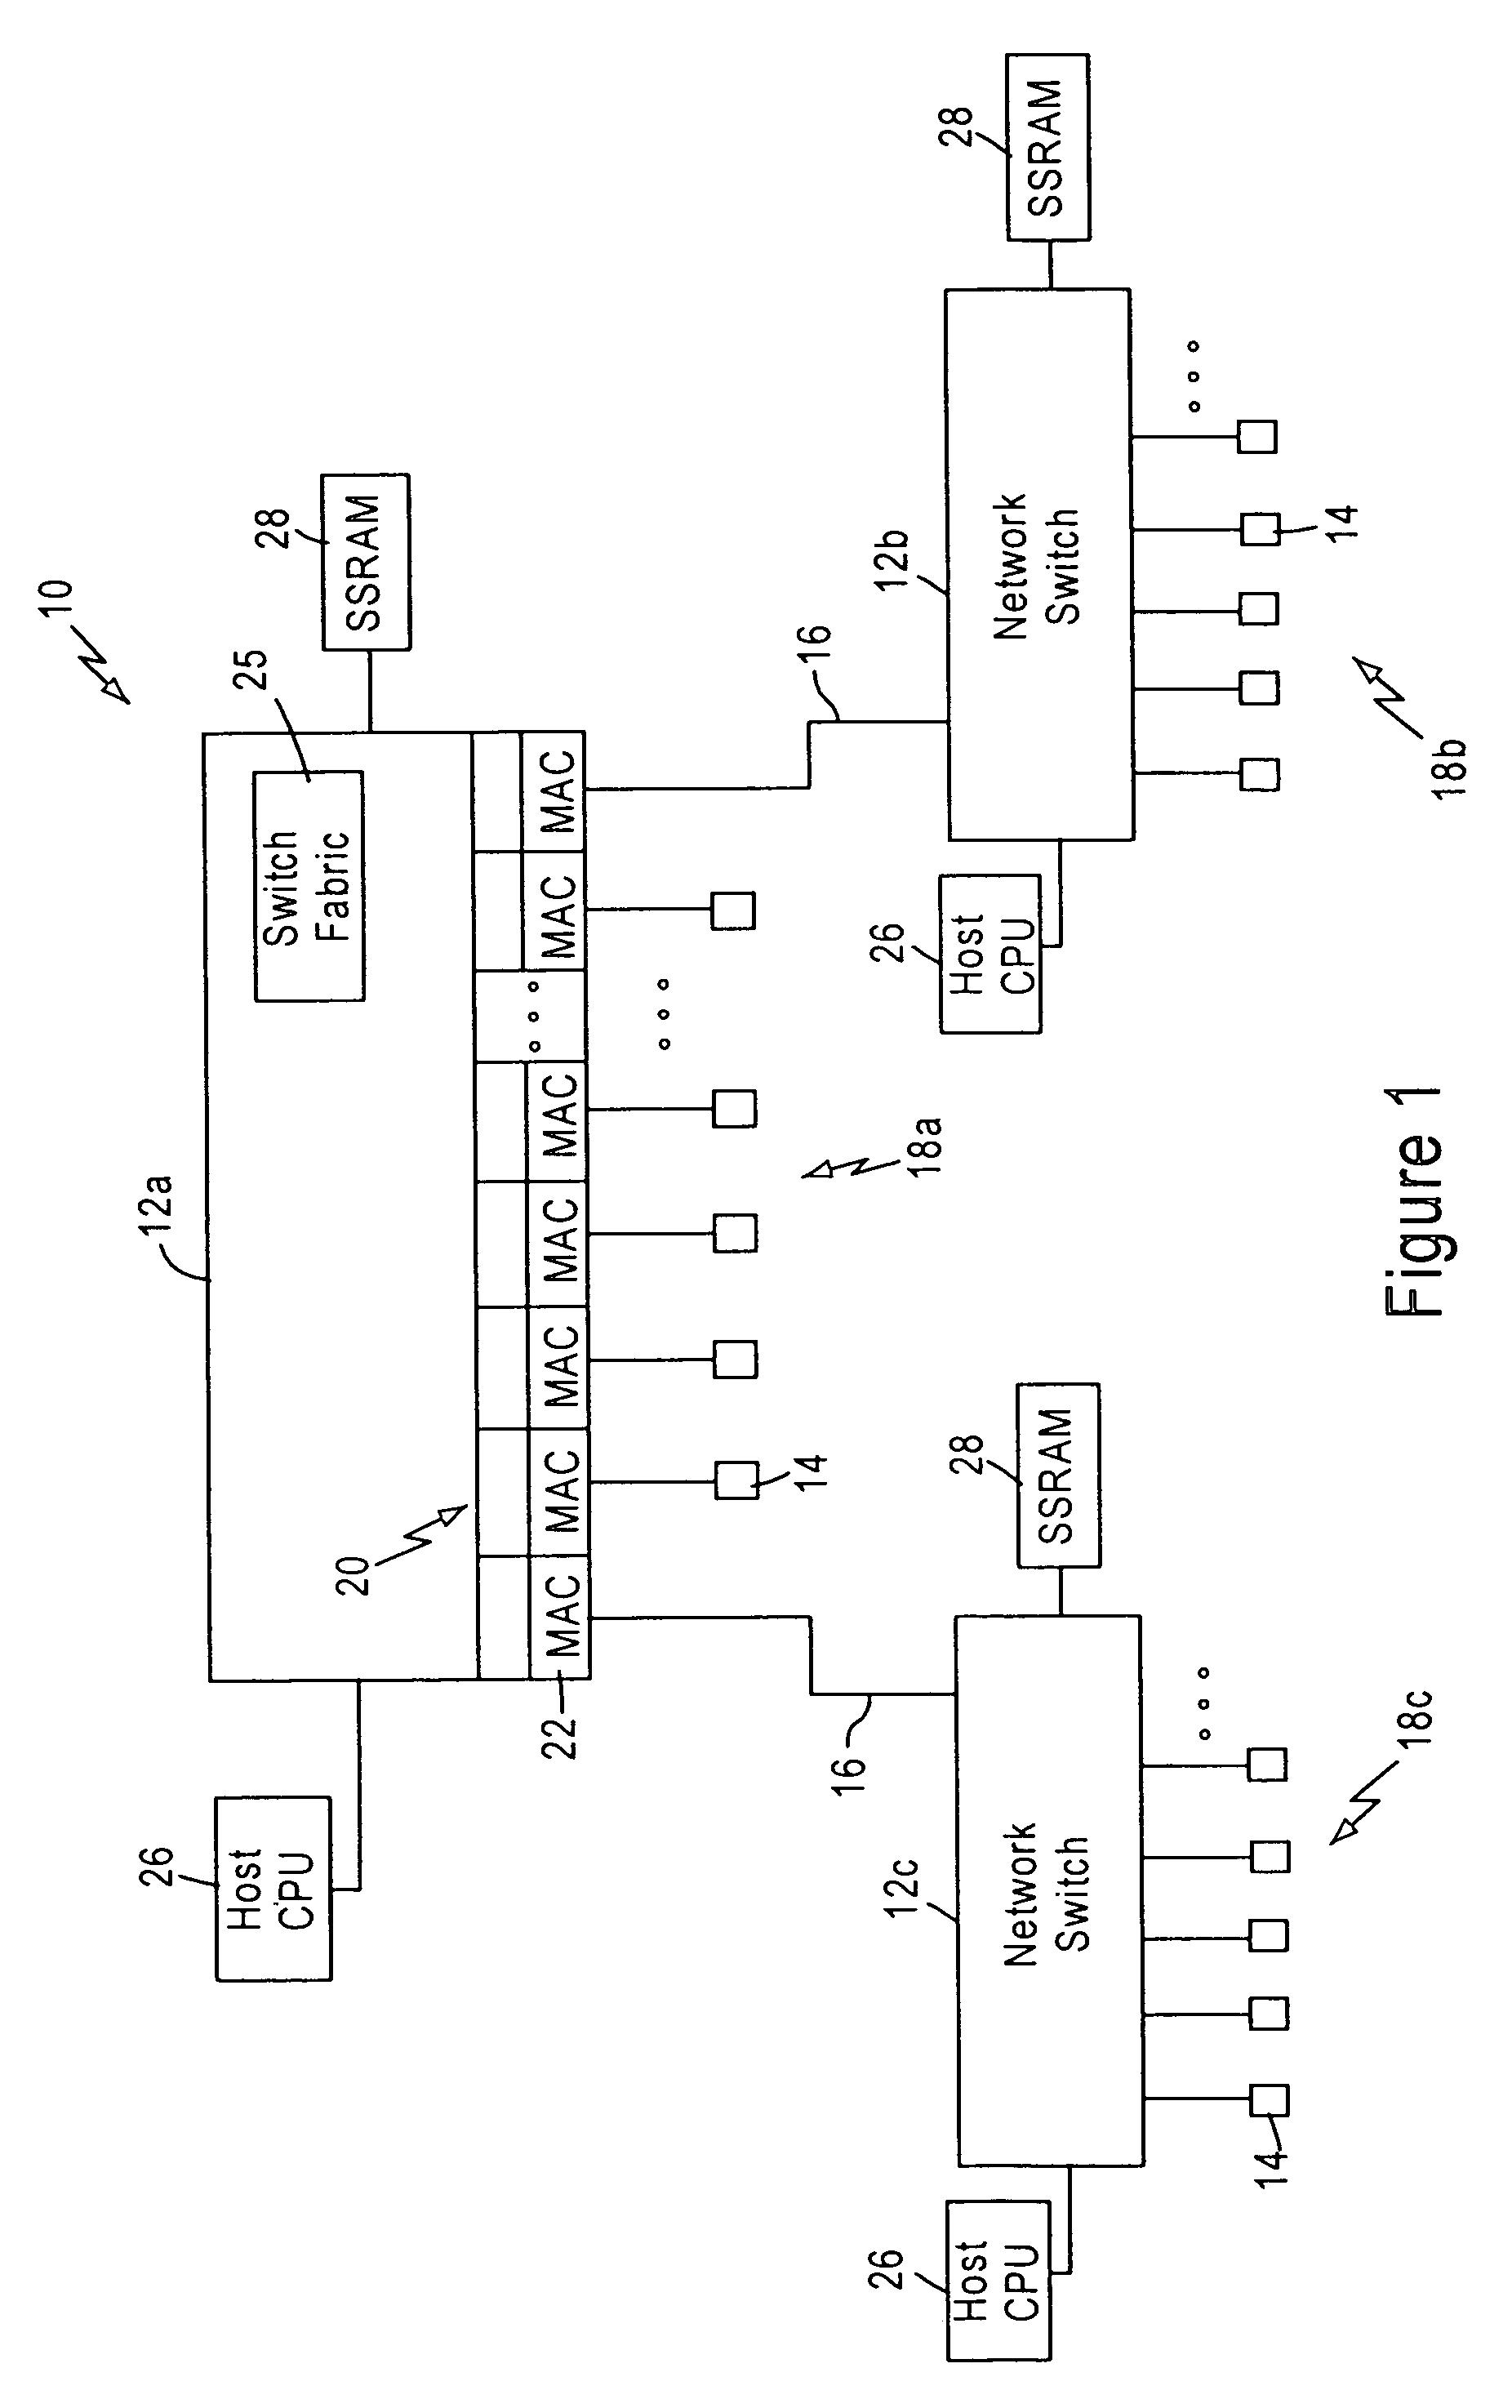 Arrangement for searching packet policies using multi-key hash searches in a network switch